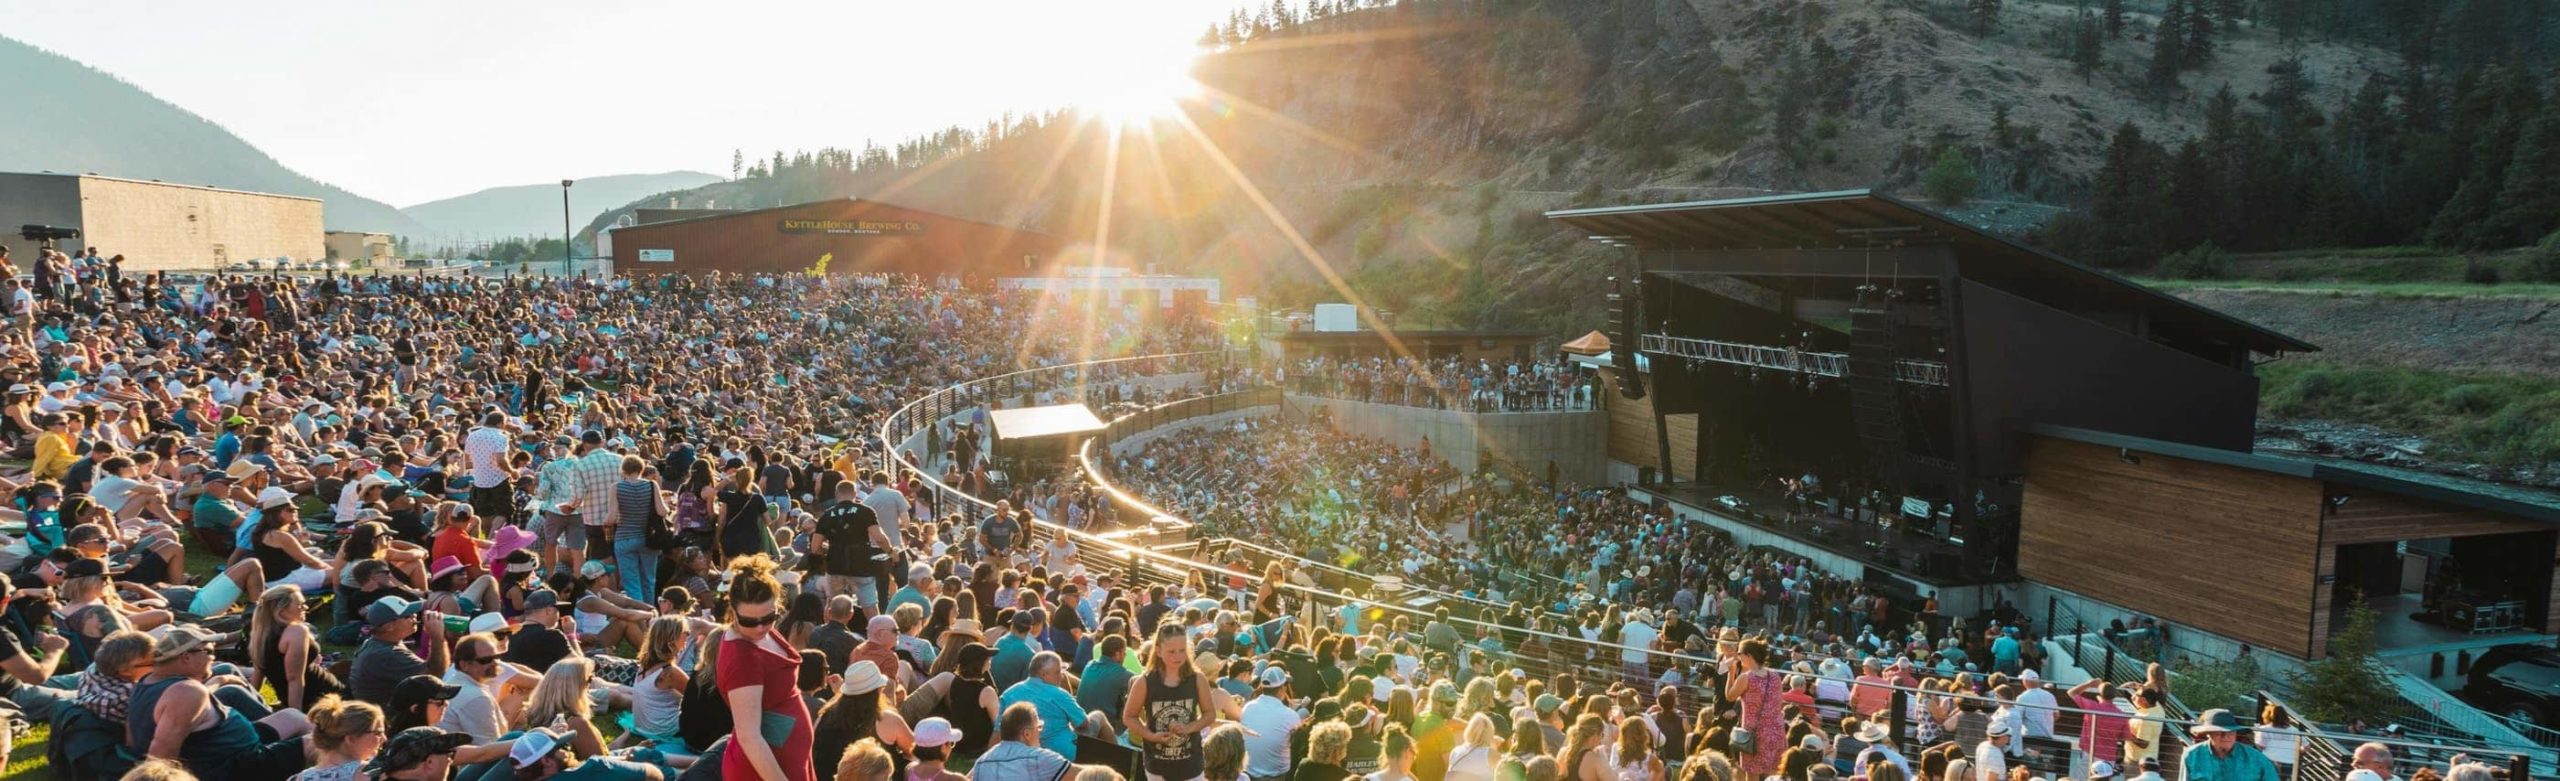 200 Miles From Montana: Greensky Bluegrass Travel Package Giveaway Image